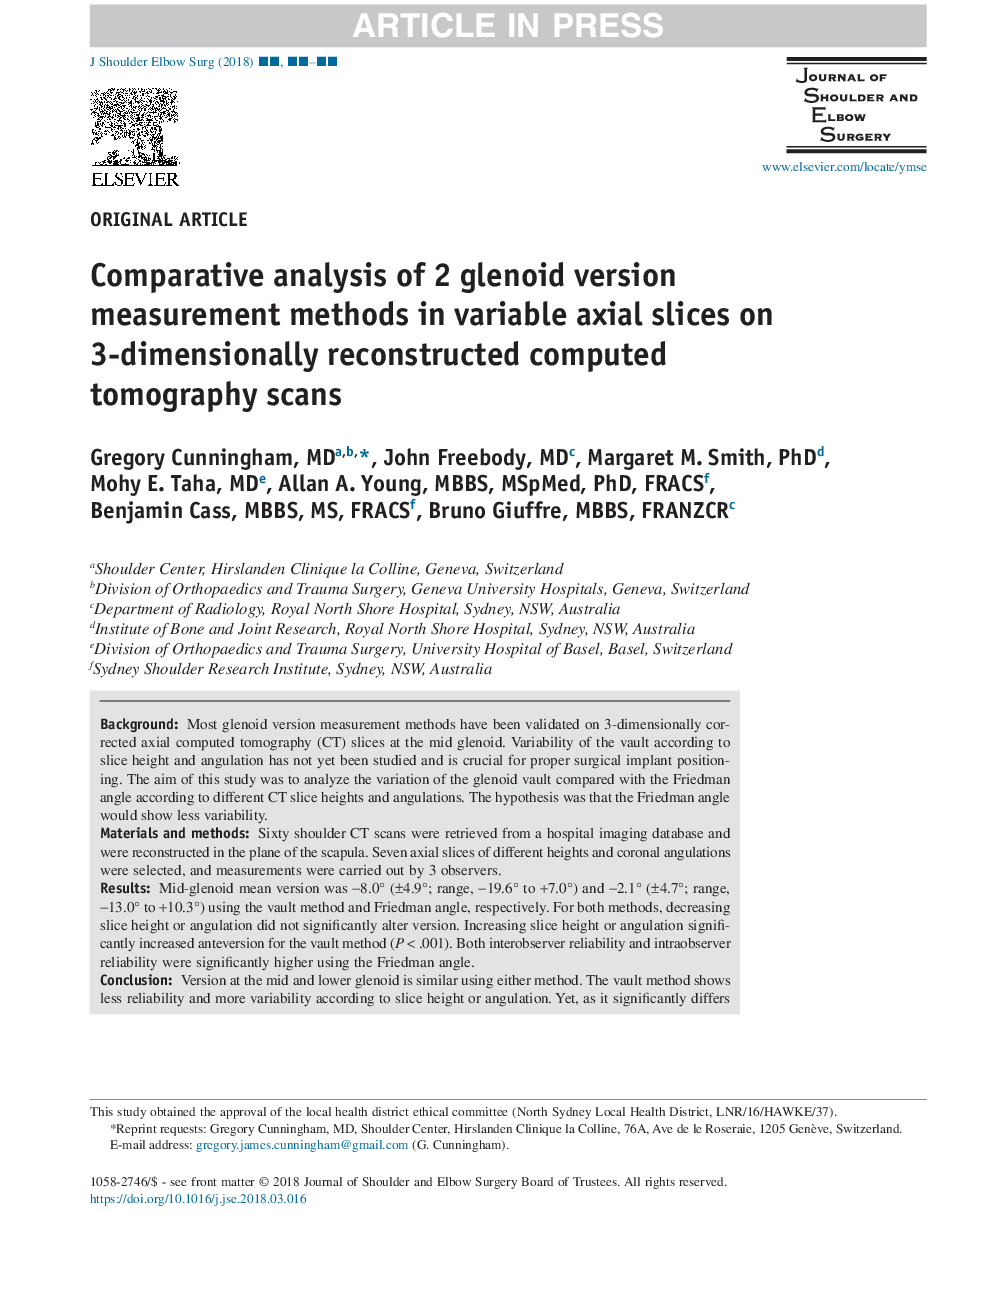 Comparative analysis of 2 glenoid version measurement methods in variable axial slices on 3-dimensionally reconstructed computed tomography scans